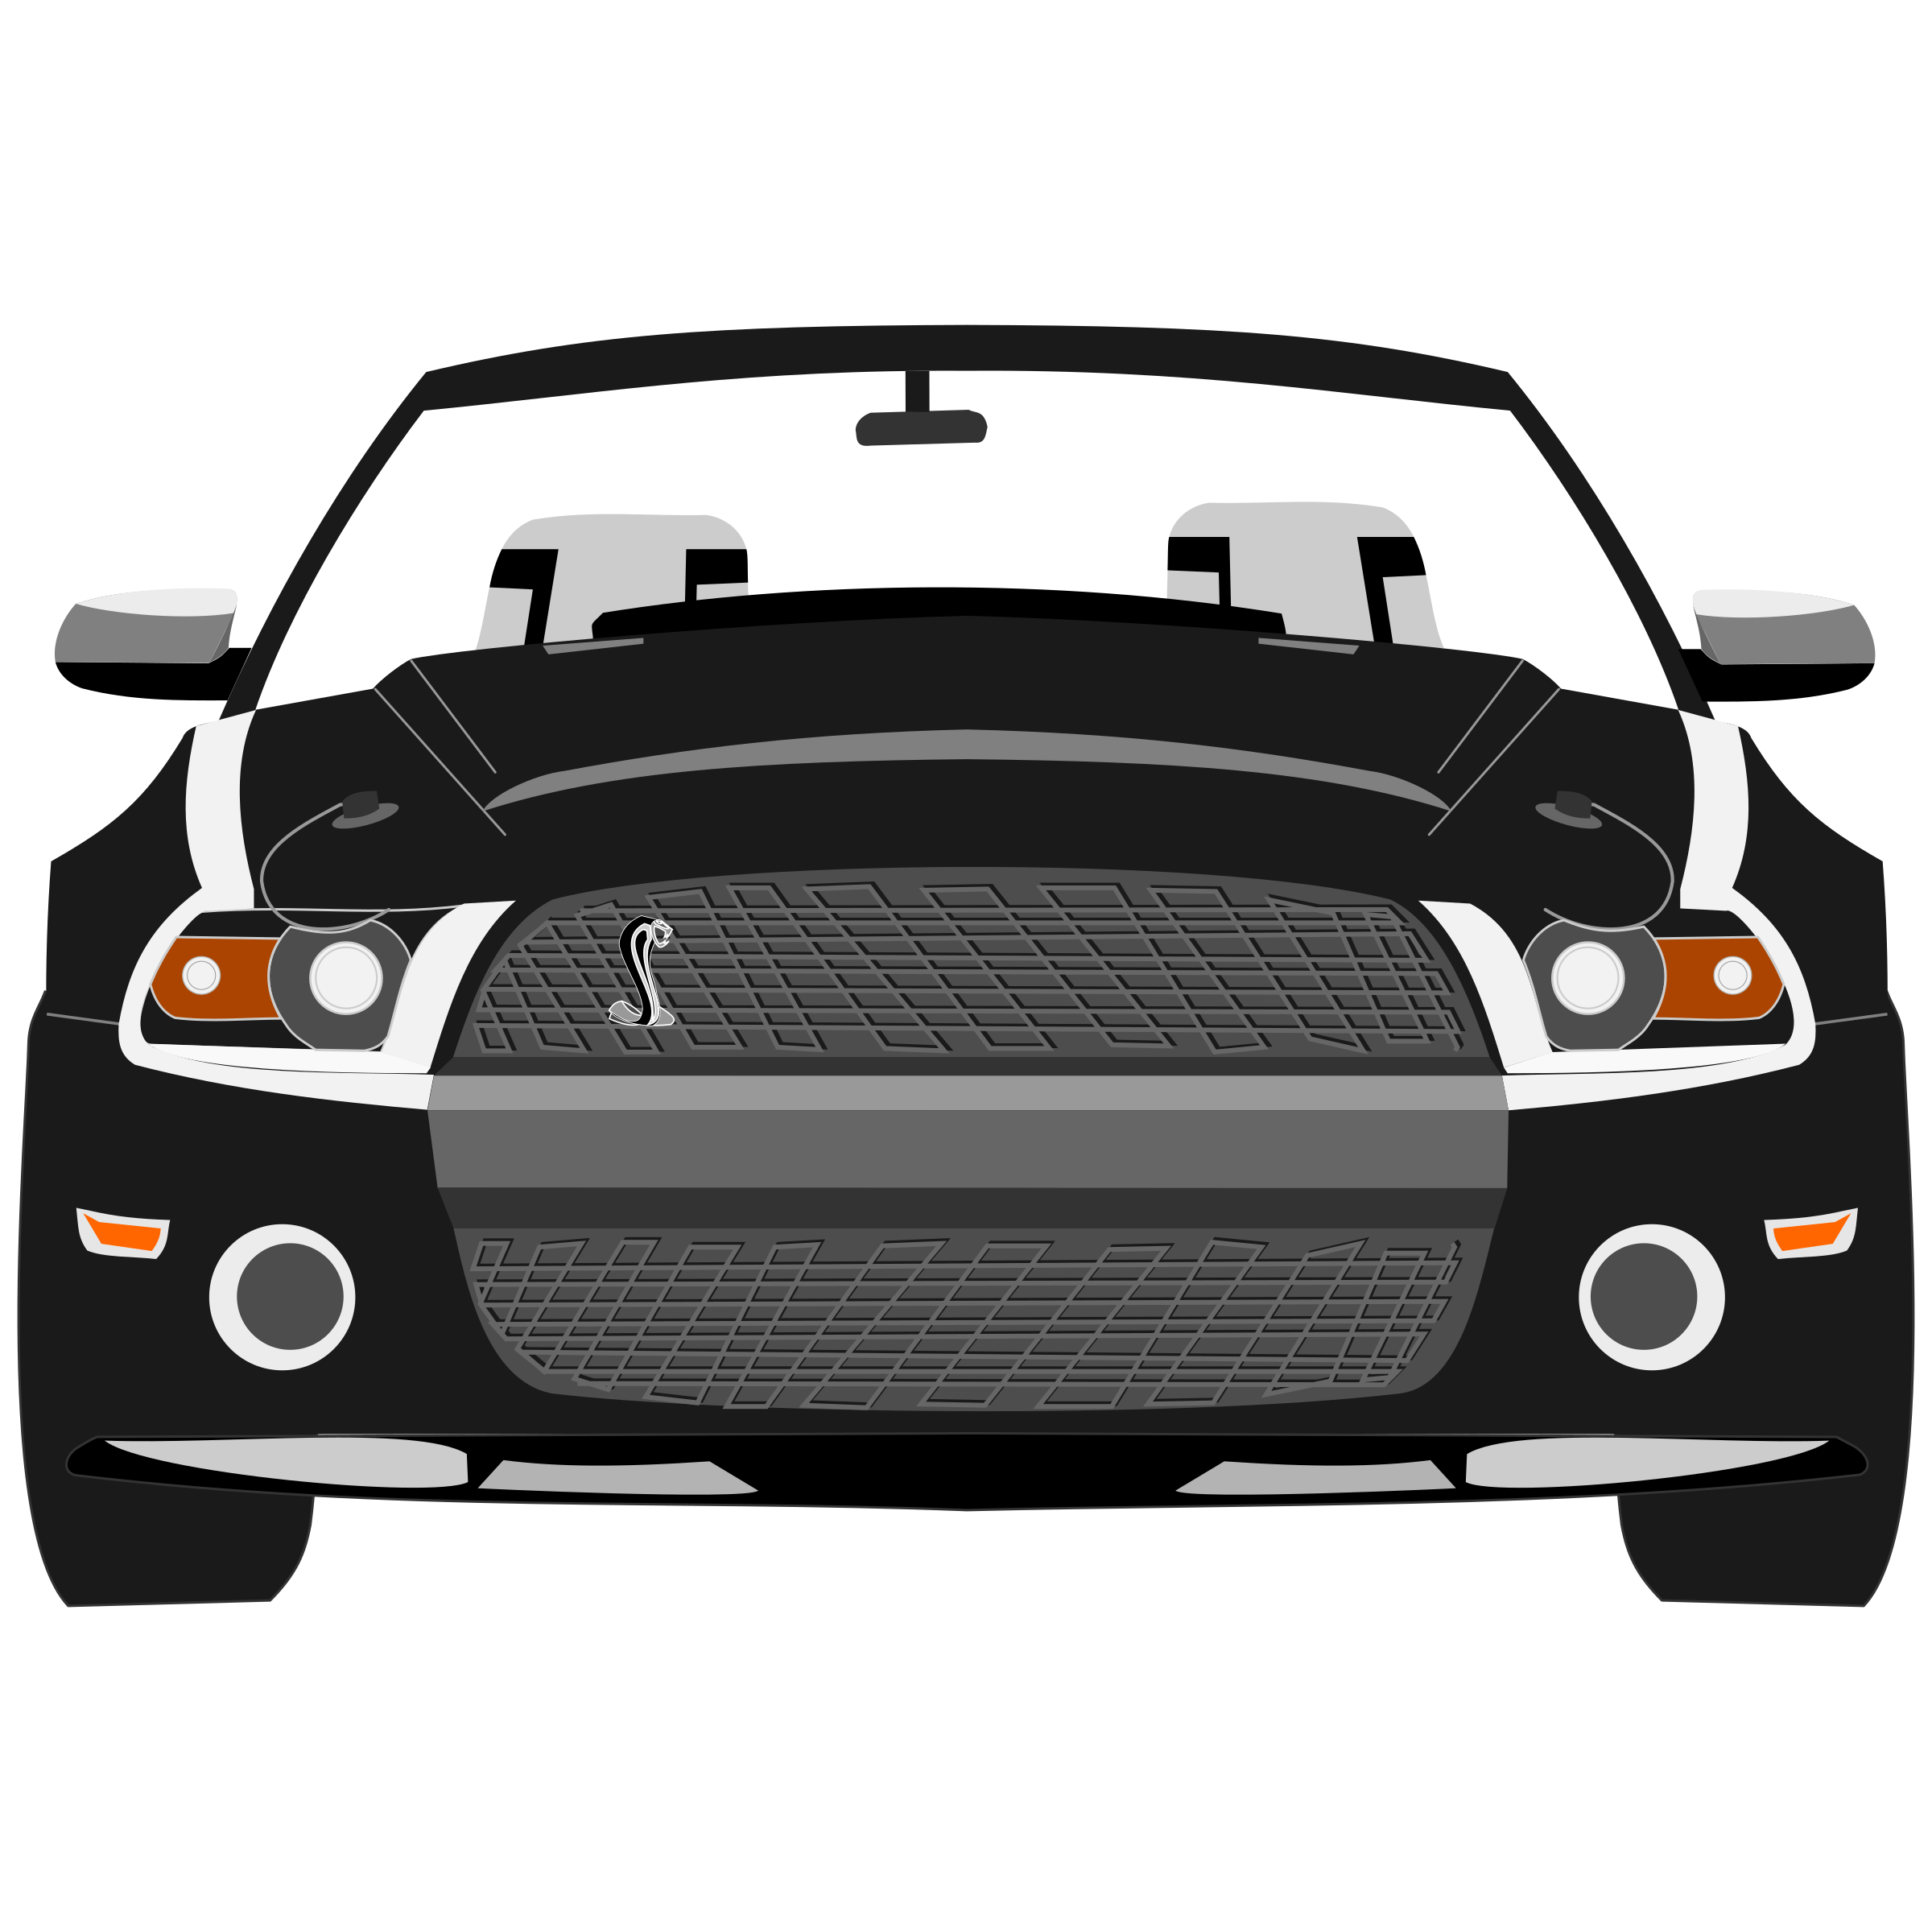 Big Image (Png) - Shelby, Transparent background PNG HD thumbnail